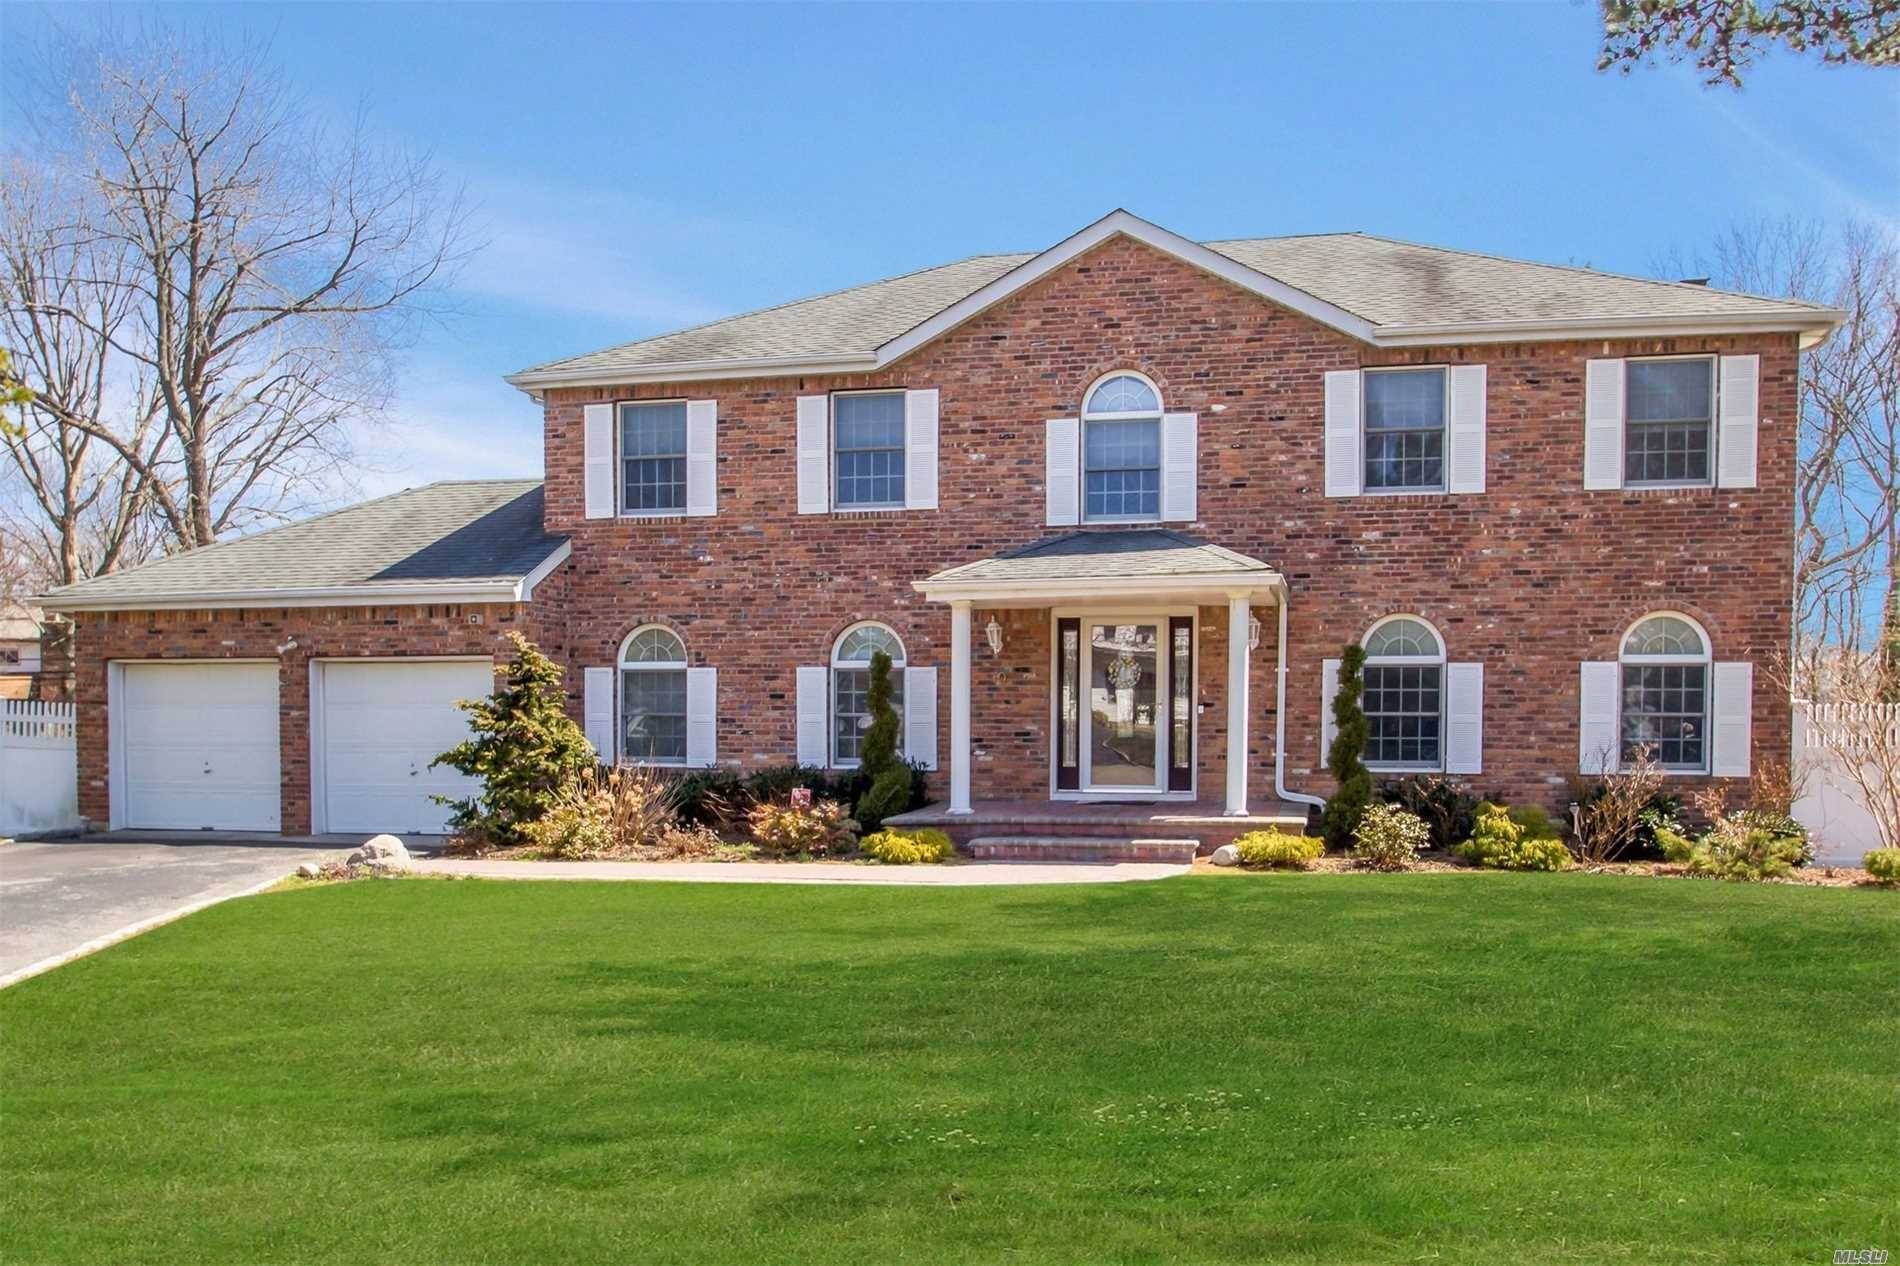 Stately Brick Center Hall Colonial On Quiet Cul De Sac, Beautifully Updated W/2 Car Garage, Inground Pool & Entertainer's Yard!